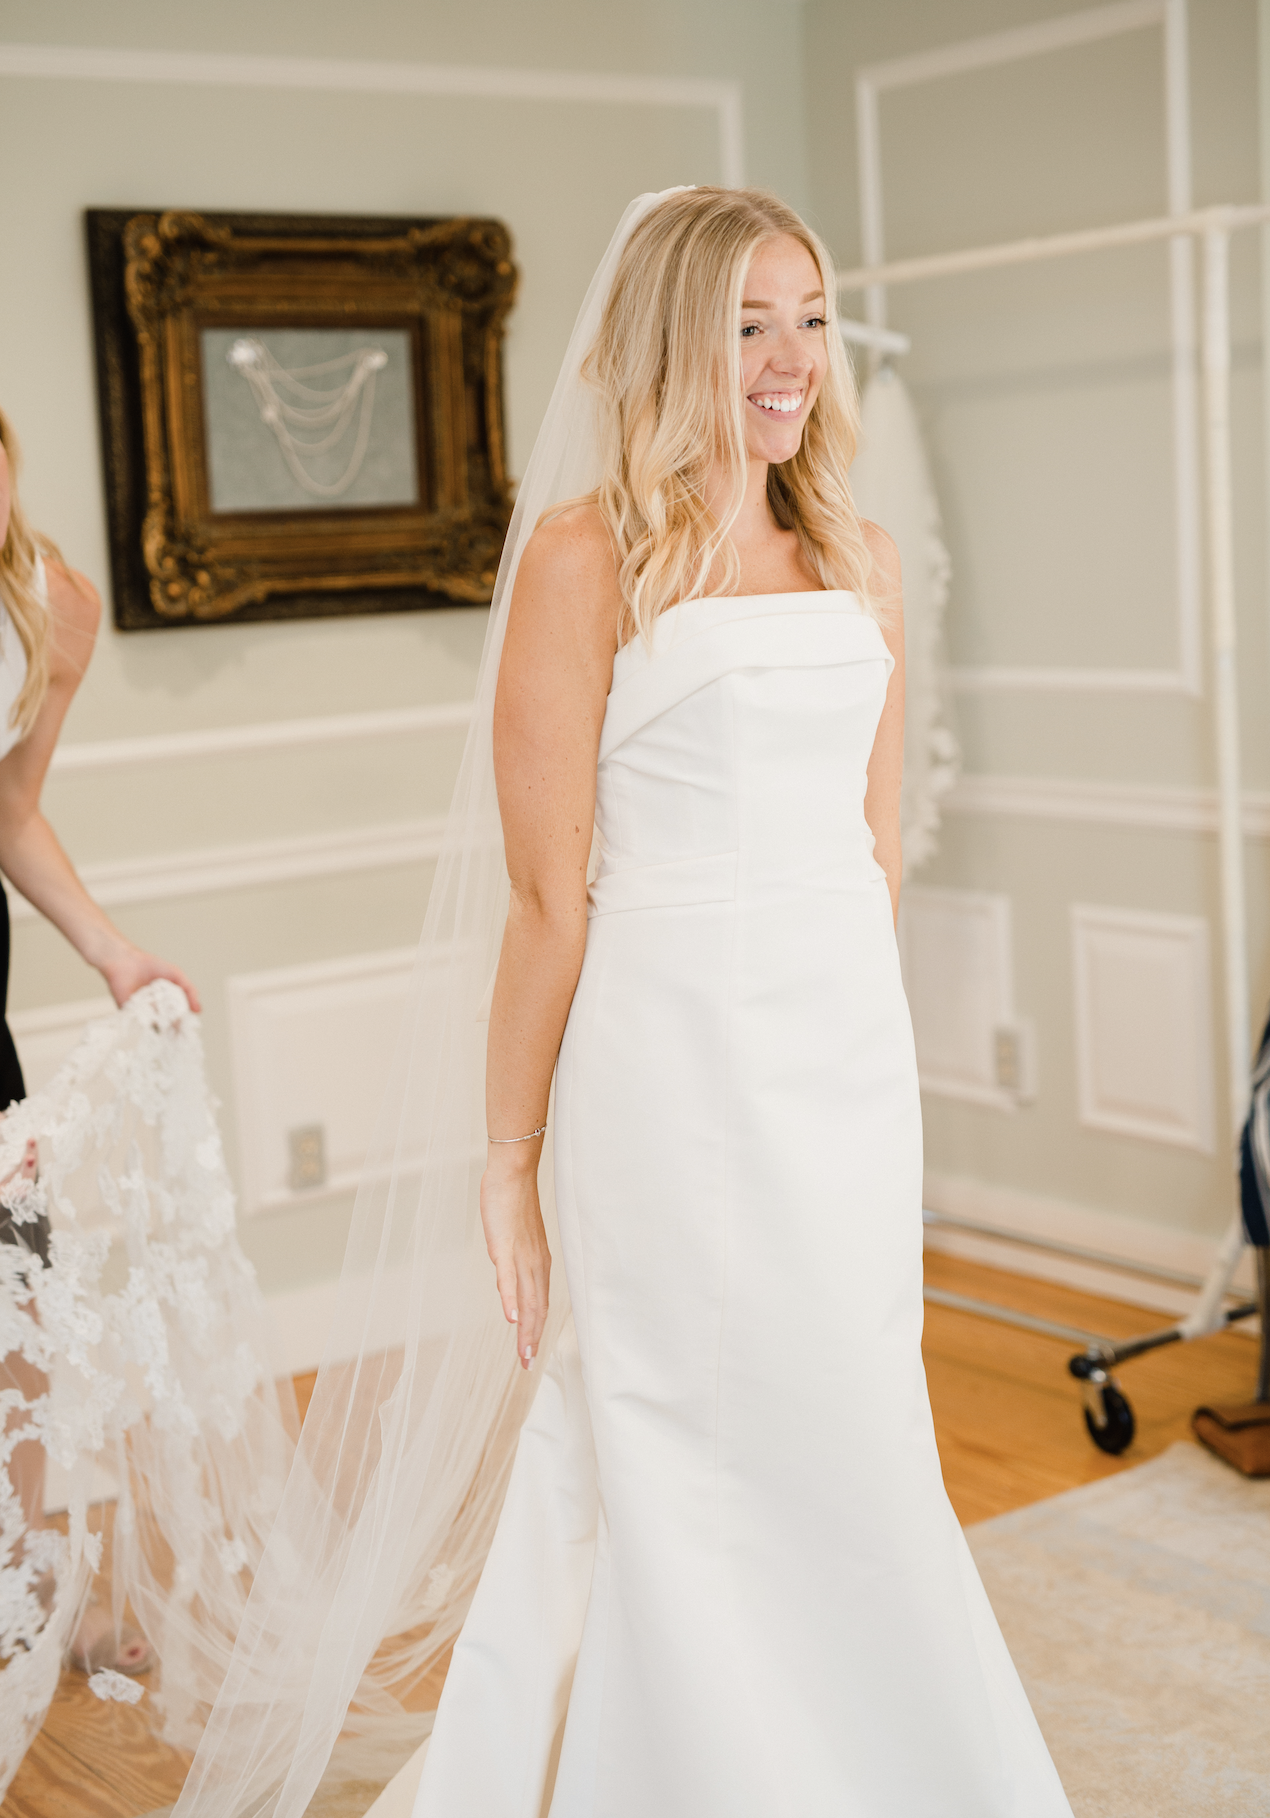 5 Wedding Dress Shopping Tips for your First Bridal Appointment. Mobile Image